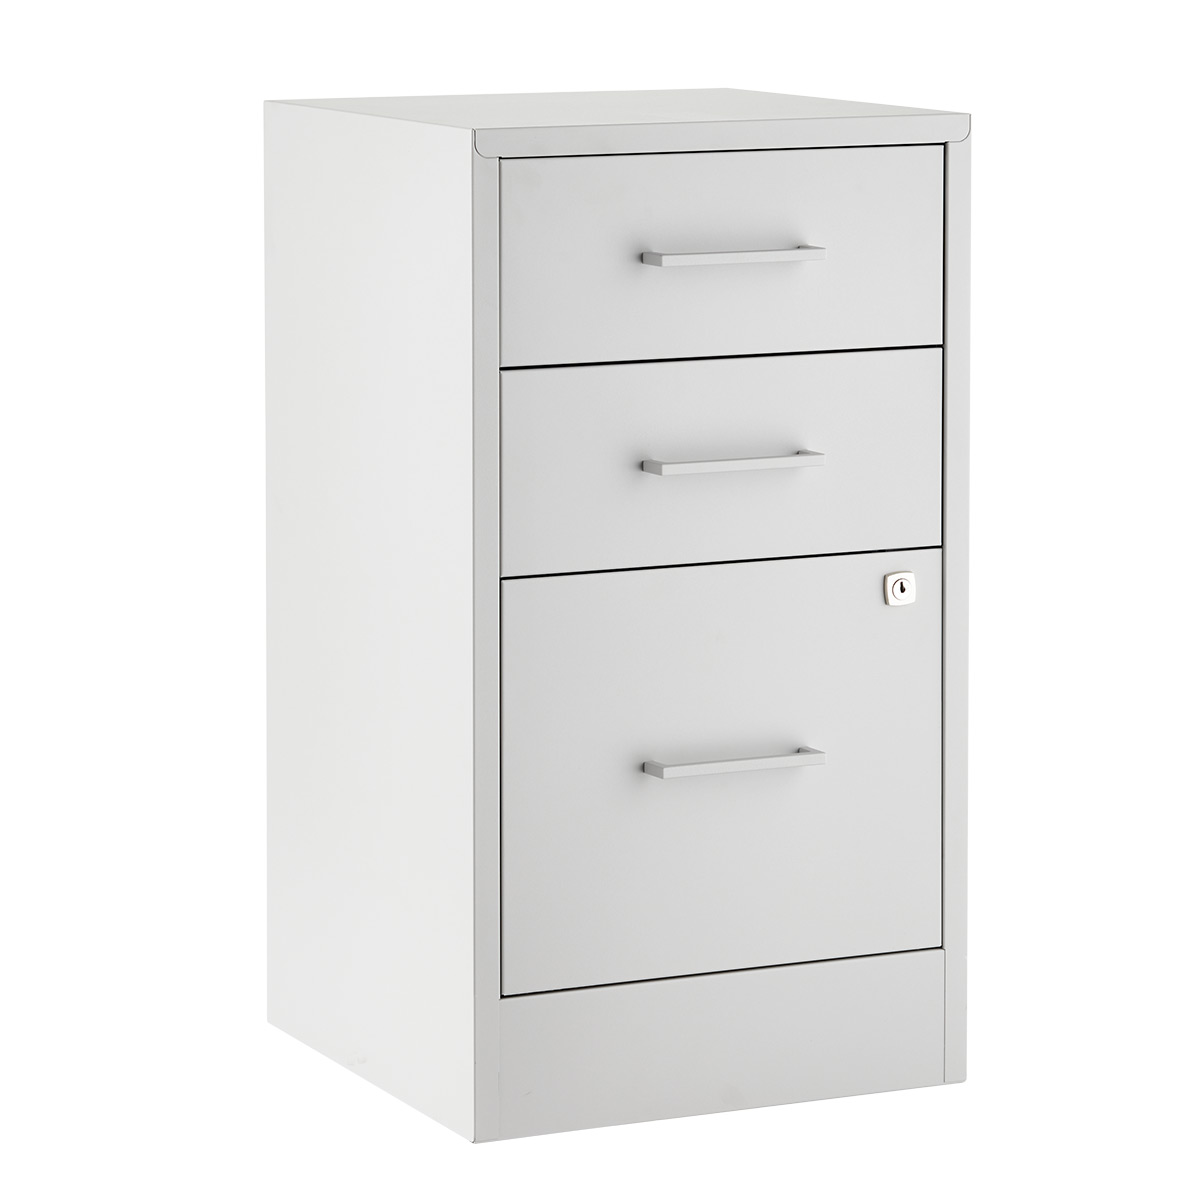 The Container Store 3-Drawer Locking Filing Cabinet Light Grey, 16-1/4 x 15-3/4 x 29 H